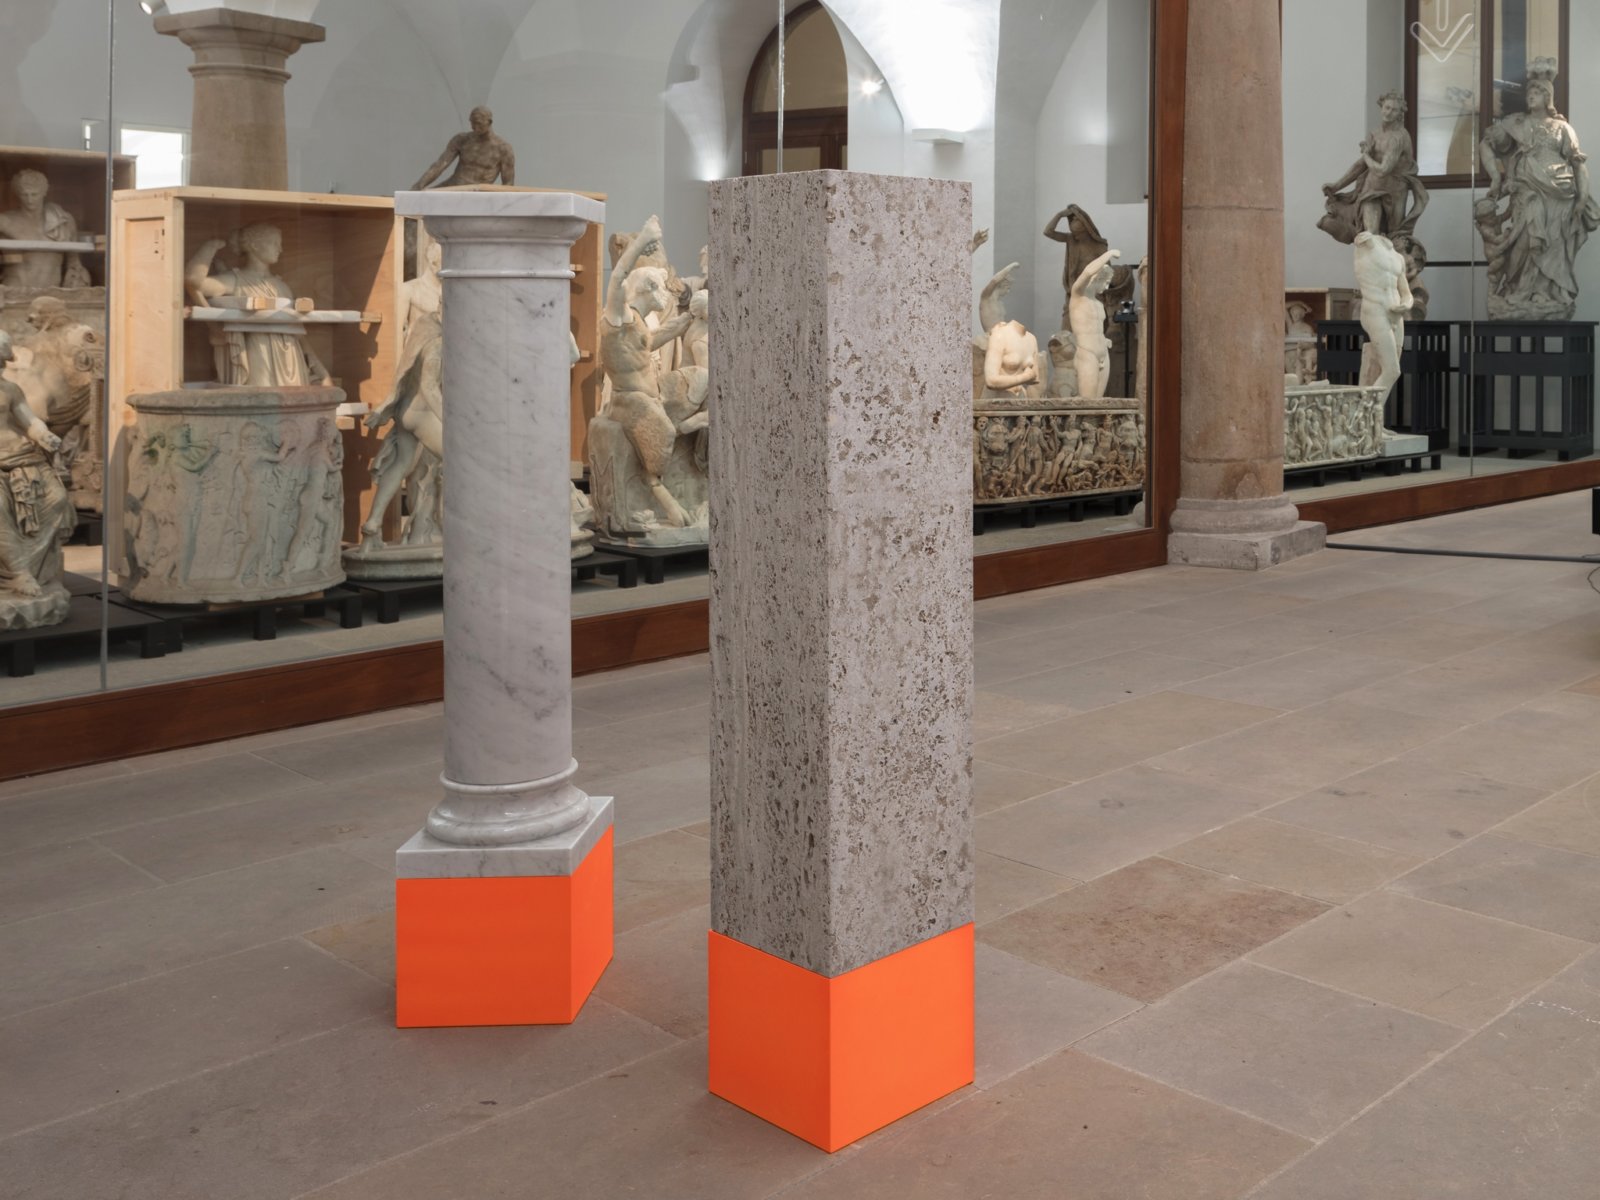 Judy Radul, Show Support, 2019, custom controlled live video camera system, historical plinths from Albertinum collection, bases painted in highlighter pen colours, dimensions variable. Installation view, Demonstrationsräume. Céline Condorelli, Kapwani Kiwanga, Judy Radul, Albertinum, Dresden, Germany, 2019